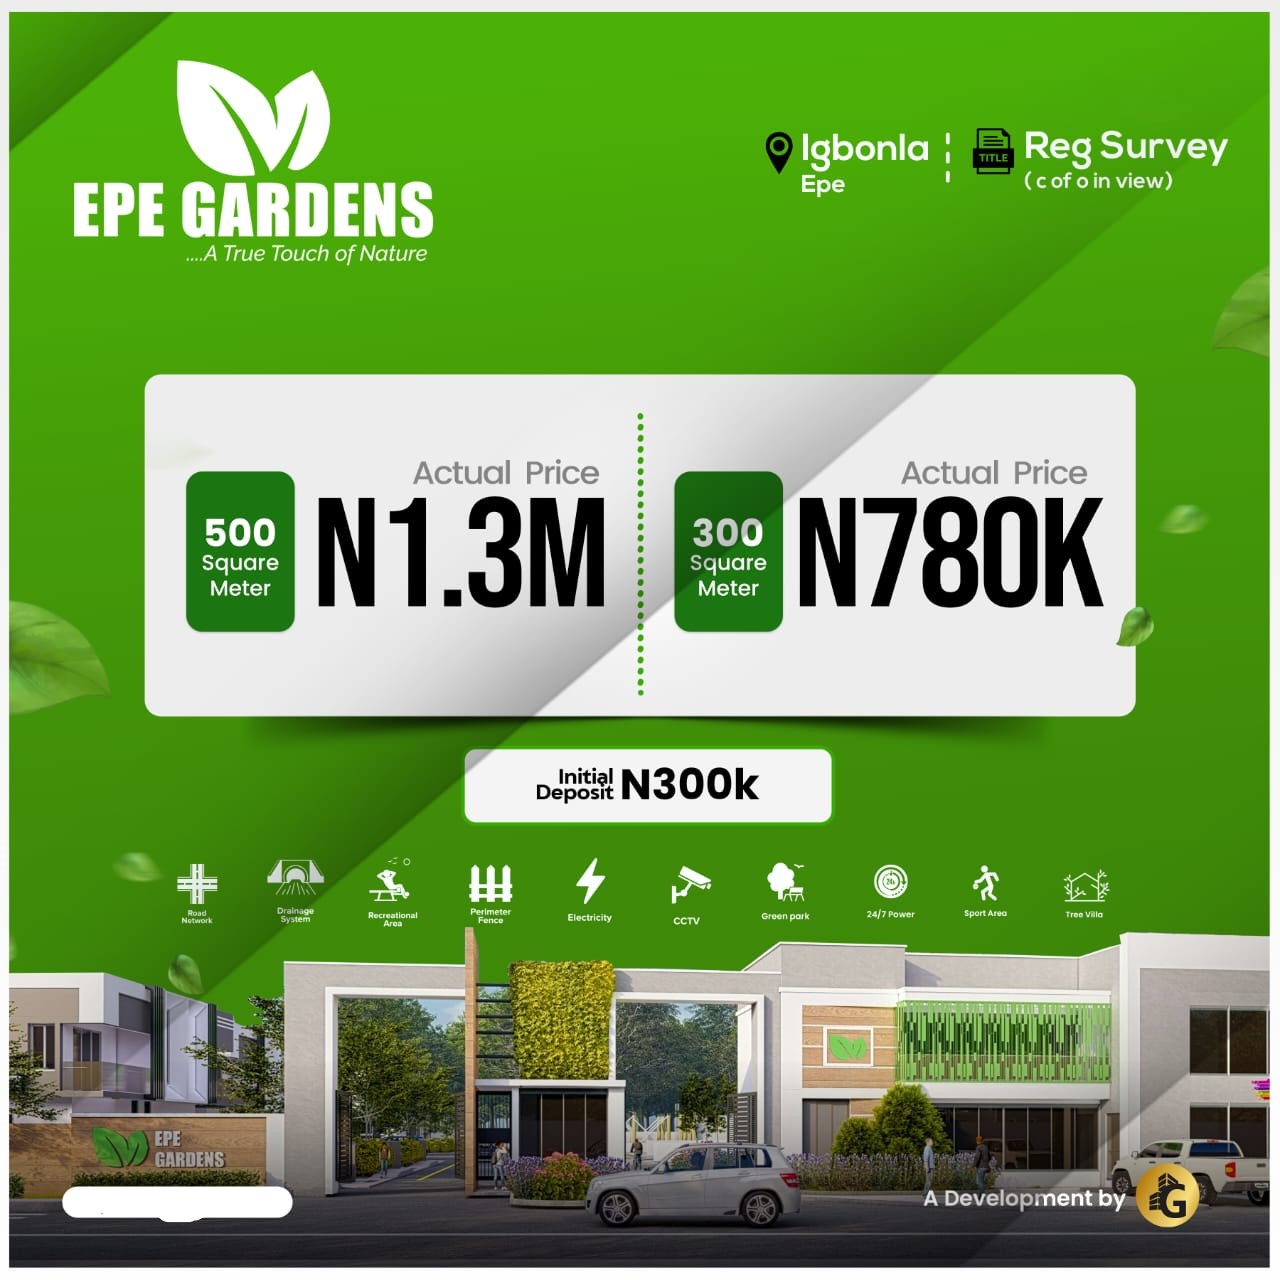 INVEST IN EPE GARDENS